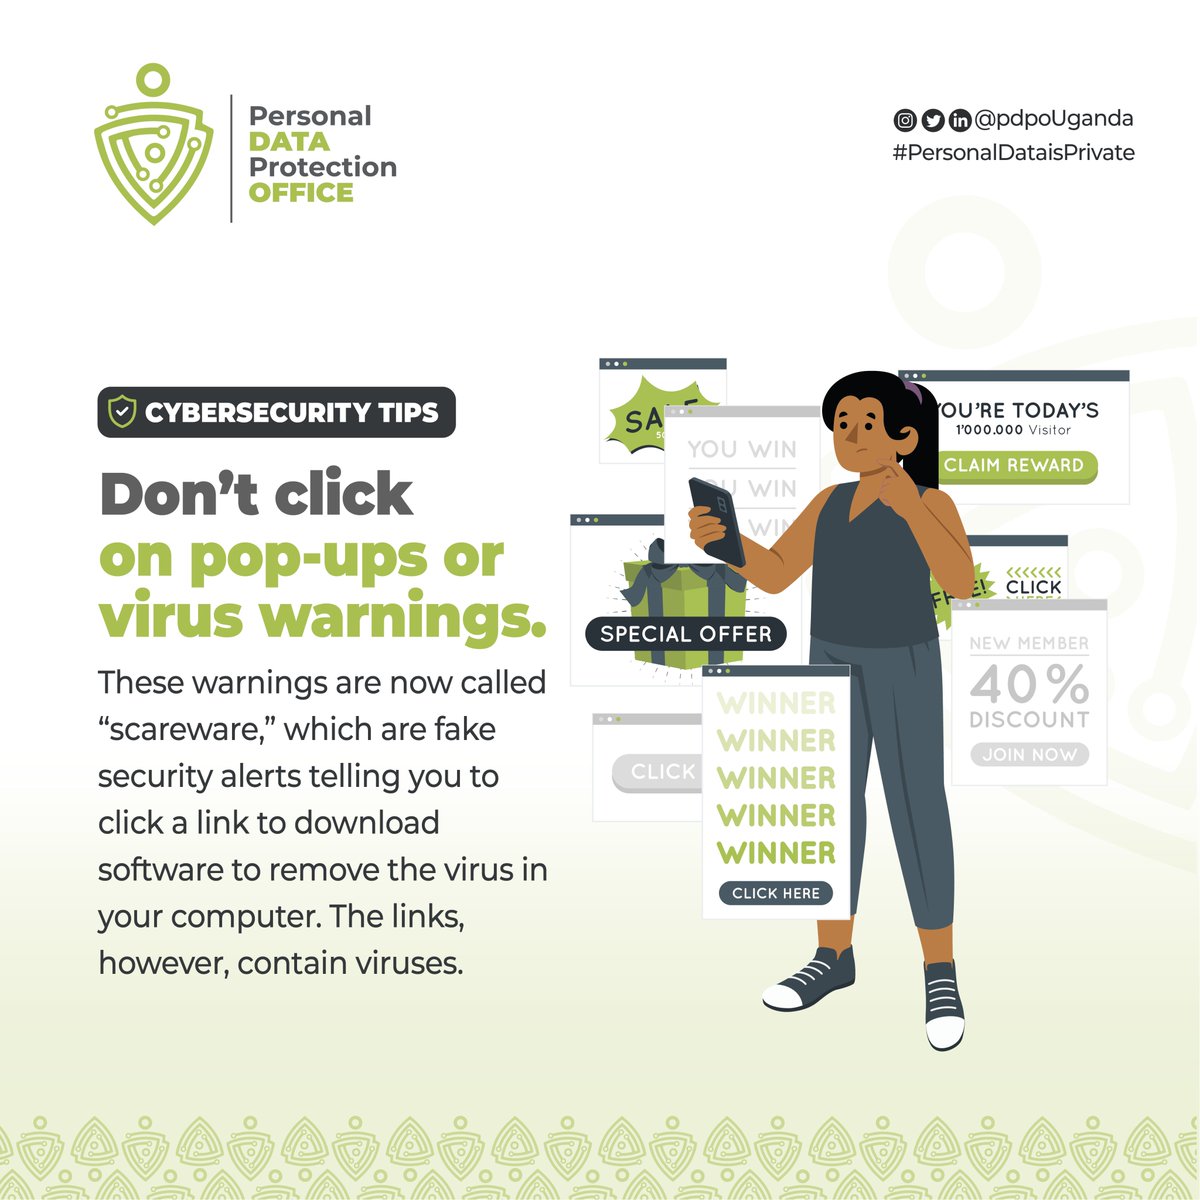 Remember those virus warnings that normally pop up on your device? Don't fall for it! Avoid clicking on pop-ups or virus warnings. Stay safe online by sticking to trusted sources and keeping your software updated. #PersonalDataisPrivate #DataPrivacyUG